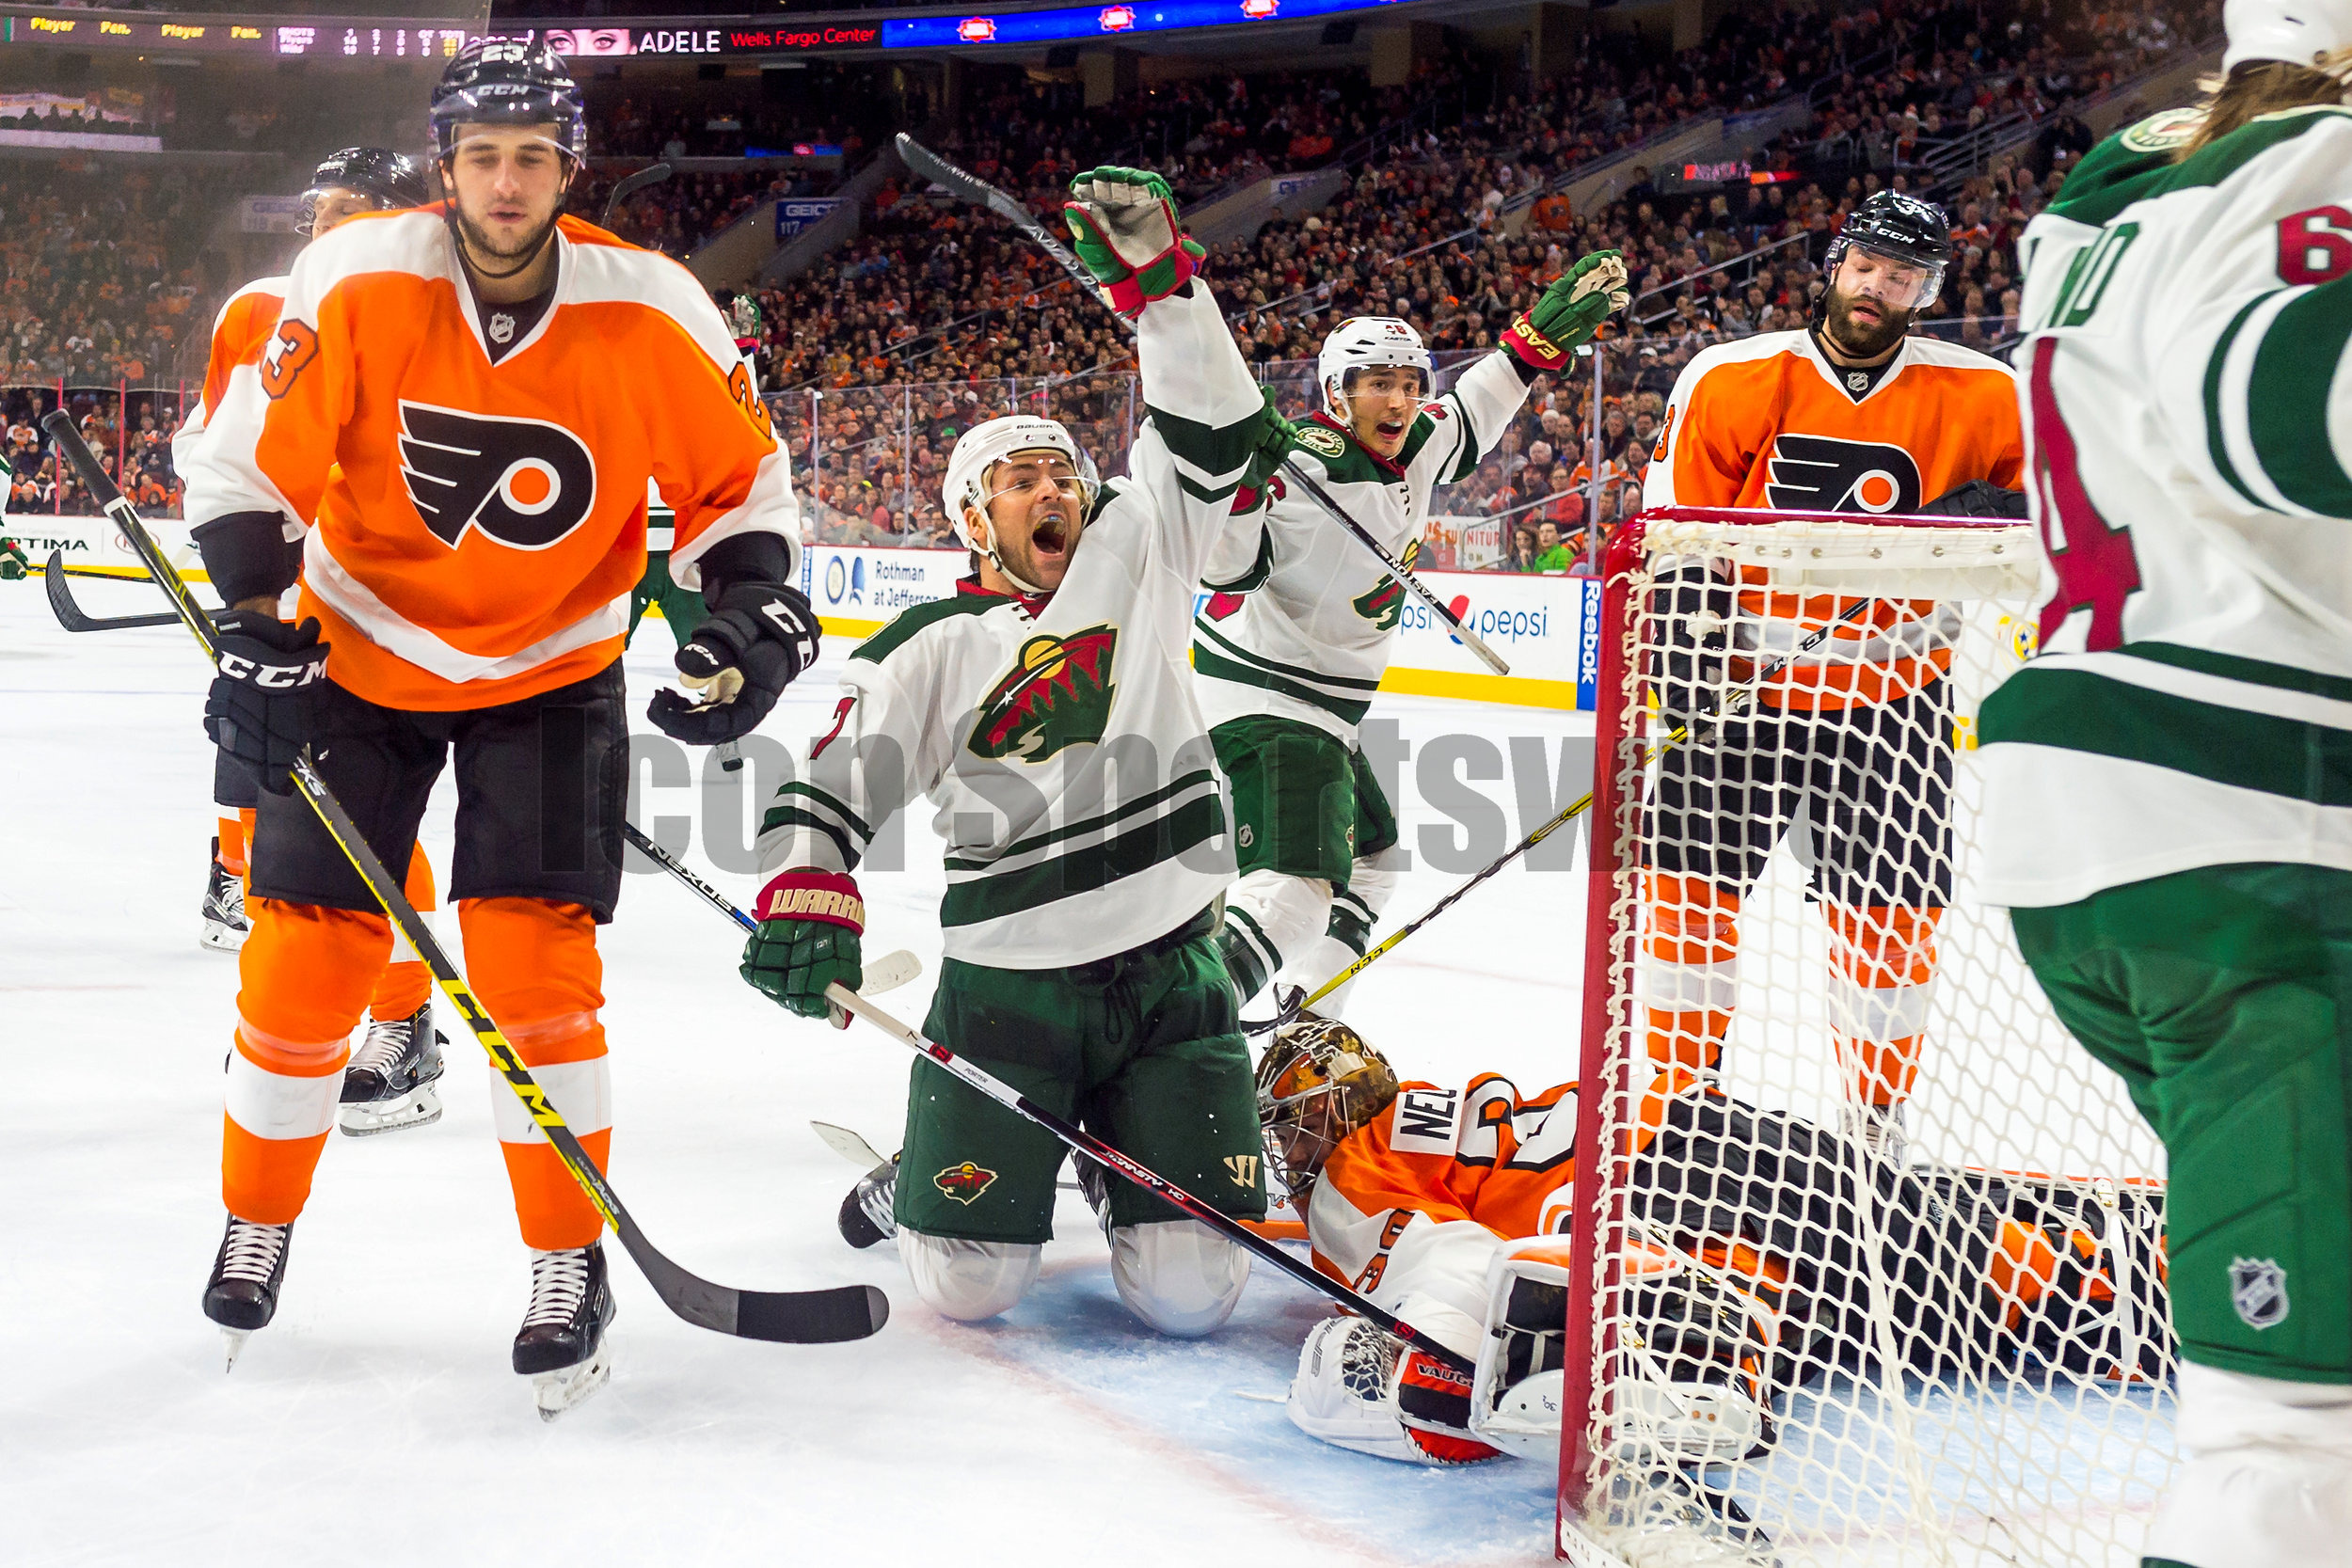  25 February 2016: Minnesota Wild left wing Chris Porter (7) celebrates the Wild's goal during the NHL game between the Minnesota Wild and the Philadelphia Flyers played at the Wells Fargo Center in Philadelphia, PA. (Photo by Gavin Baker/Icon Sports